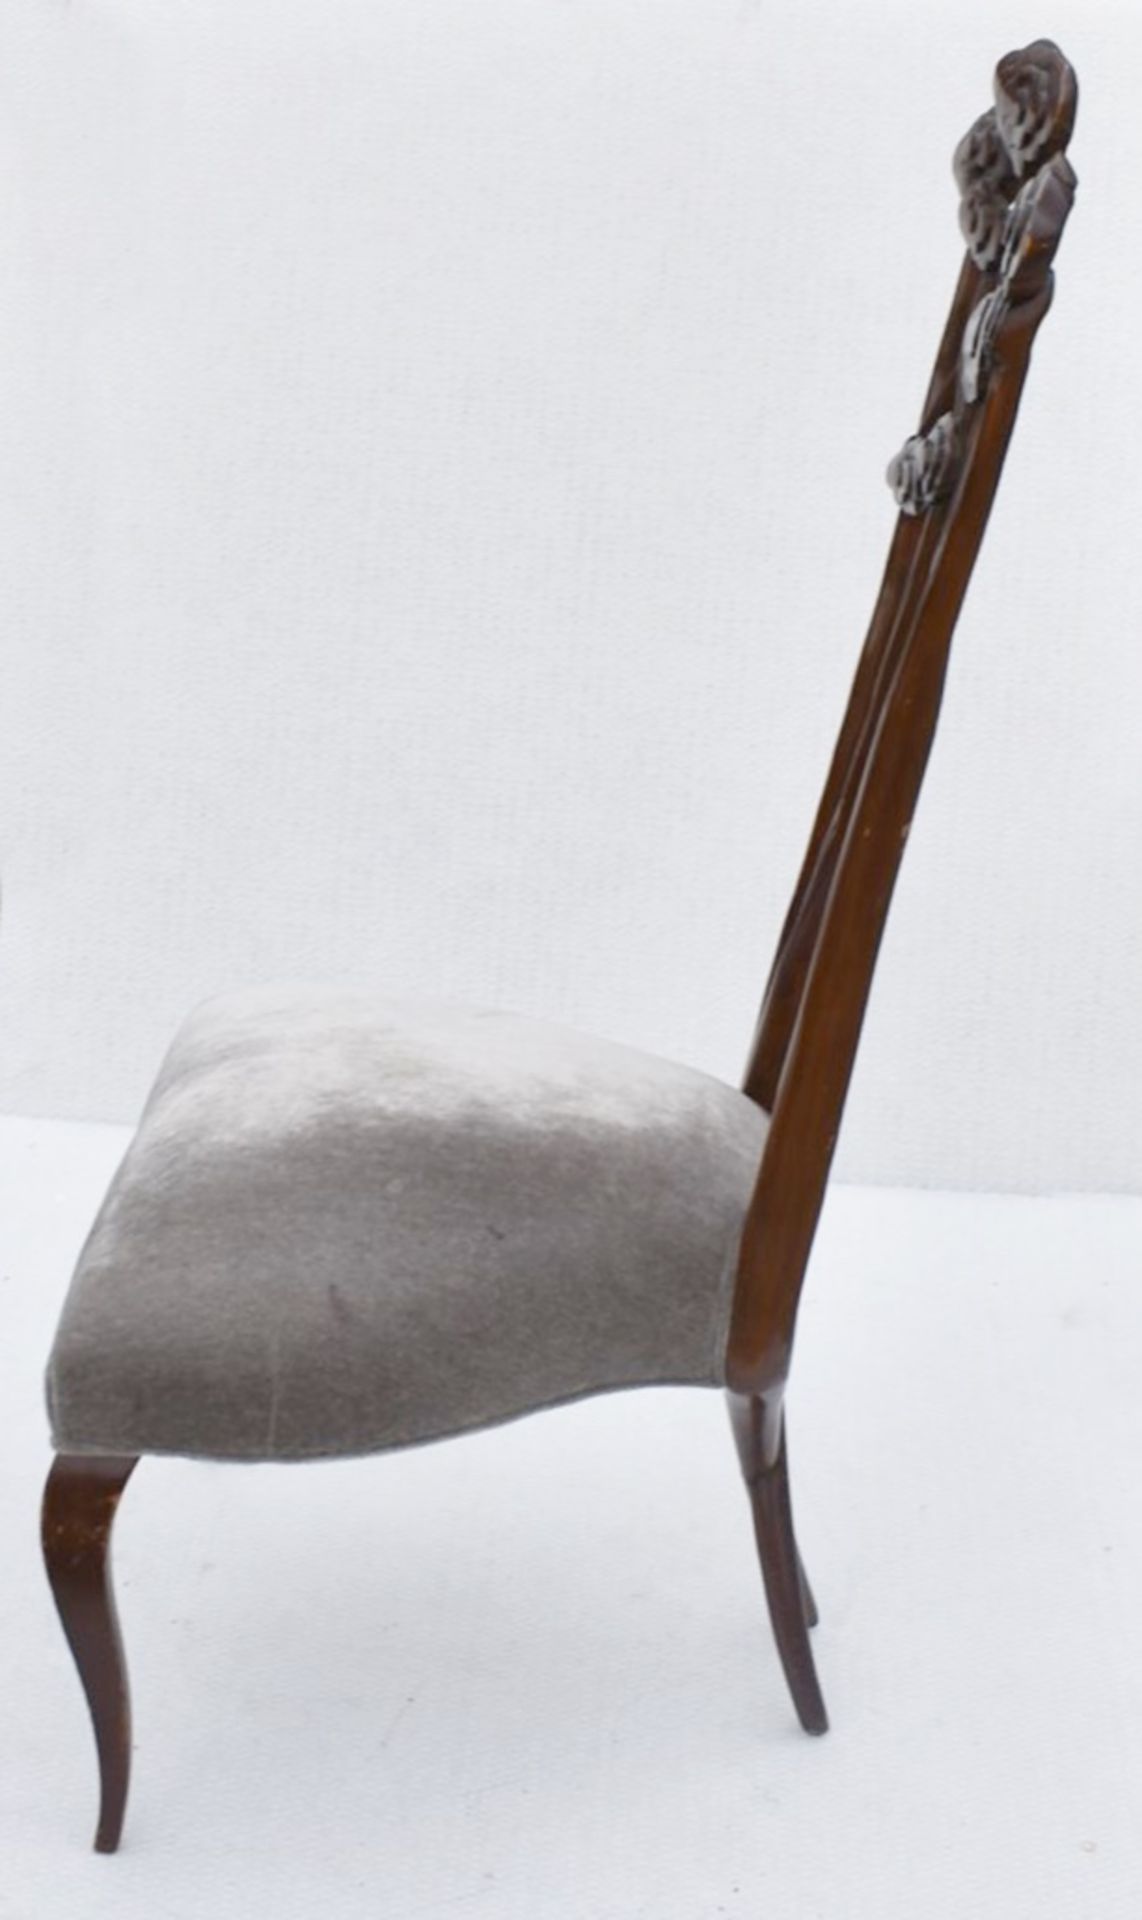 1 x CHRISTOPHER GUY 'Le Jardin' Luxury Hand-carved Solid Mahogany Designer Dining Chair - Recently - Image 4 of 14